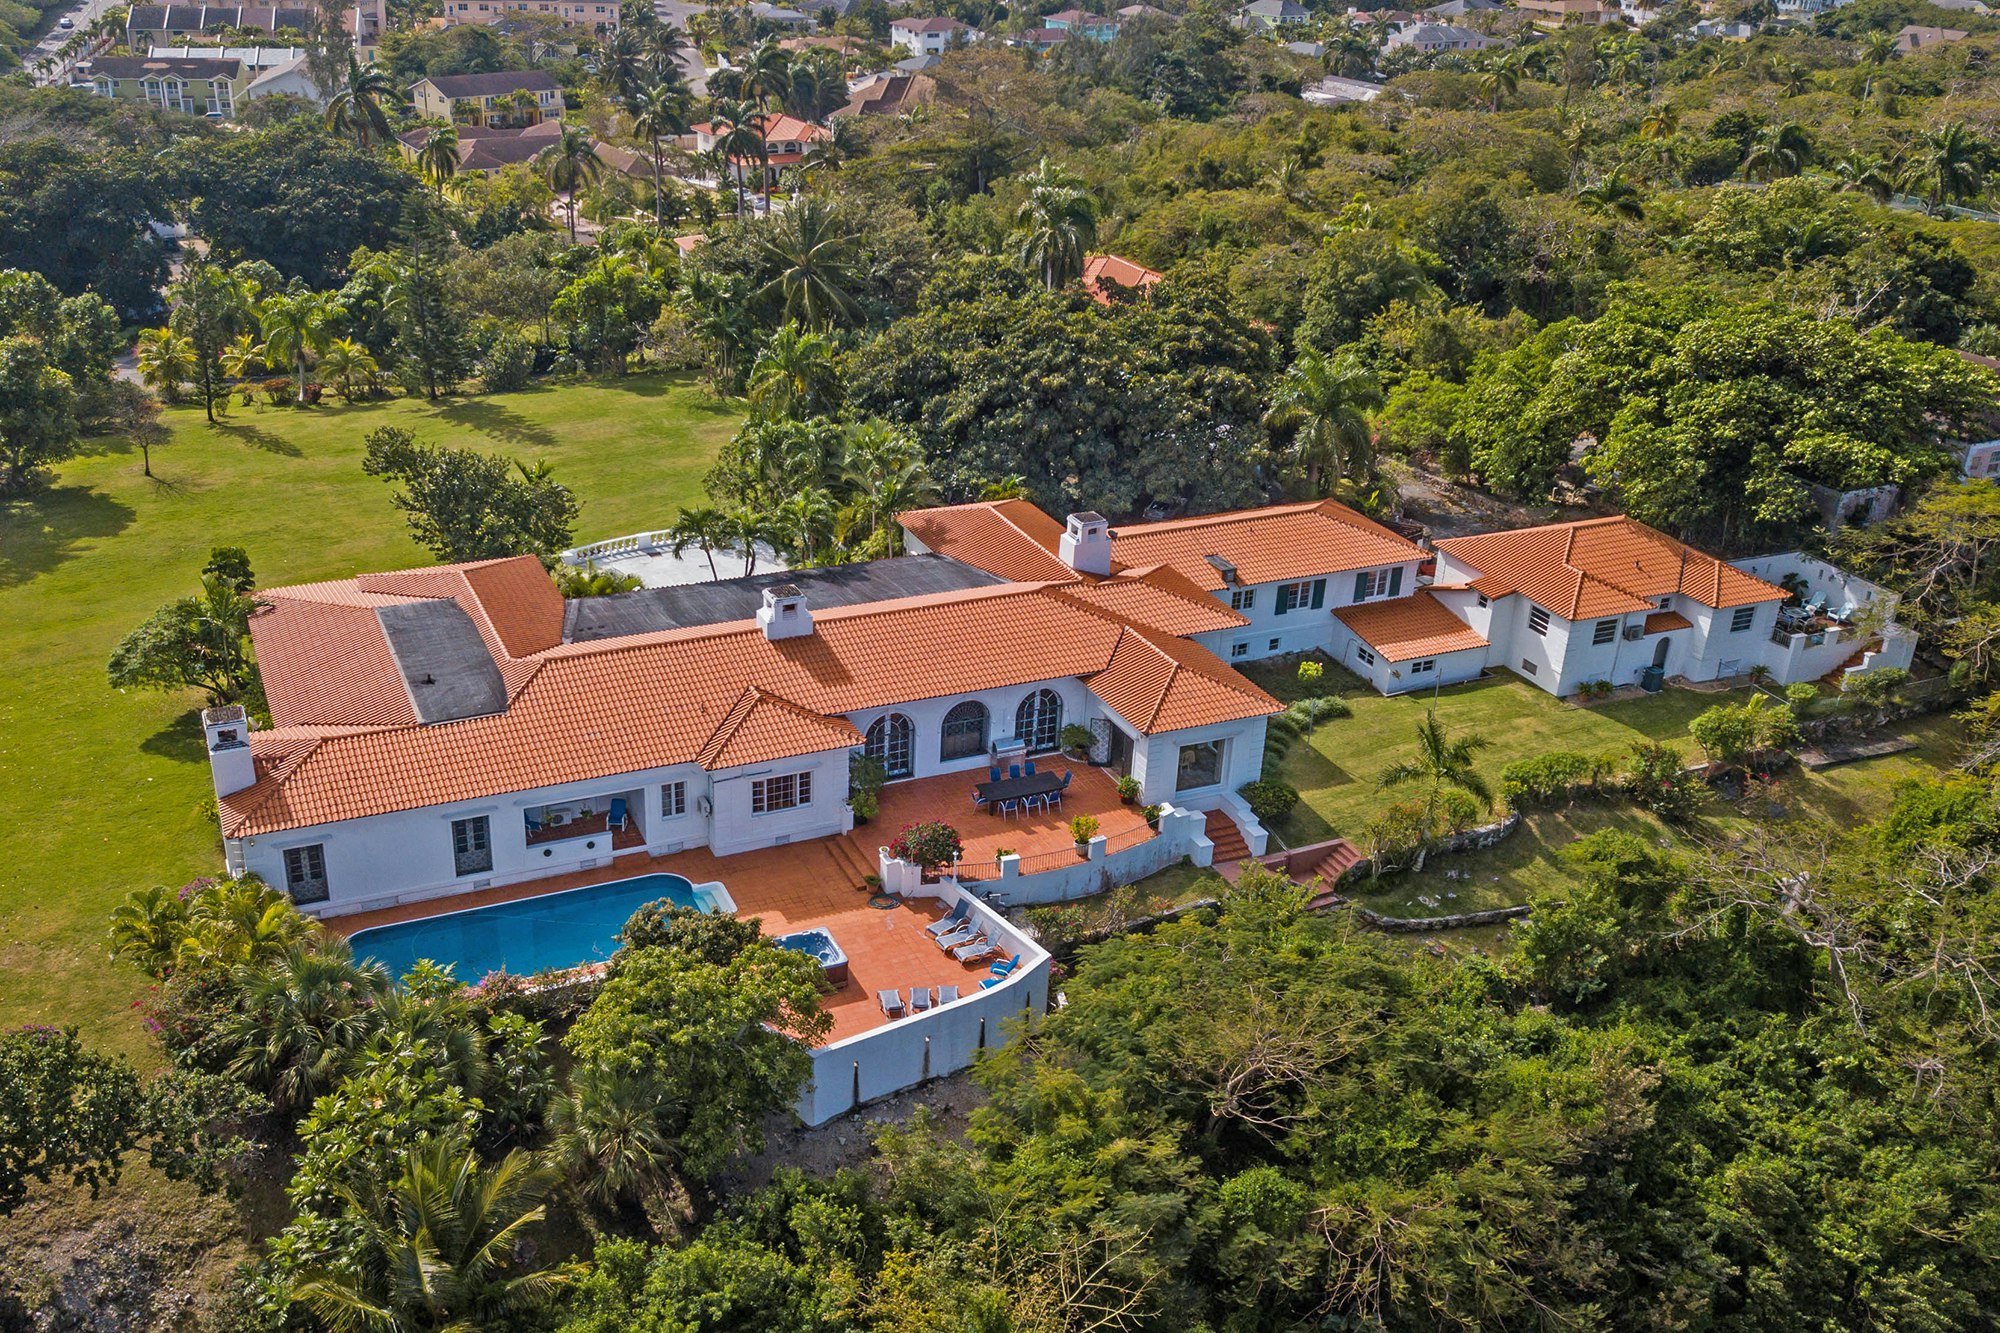 An aerial overview of the sprawling Bahamas mansion